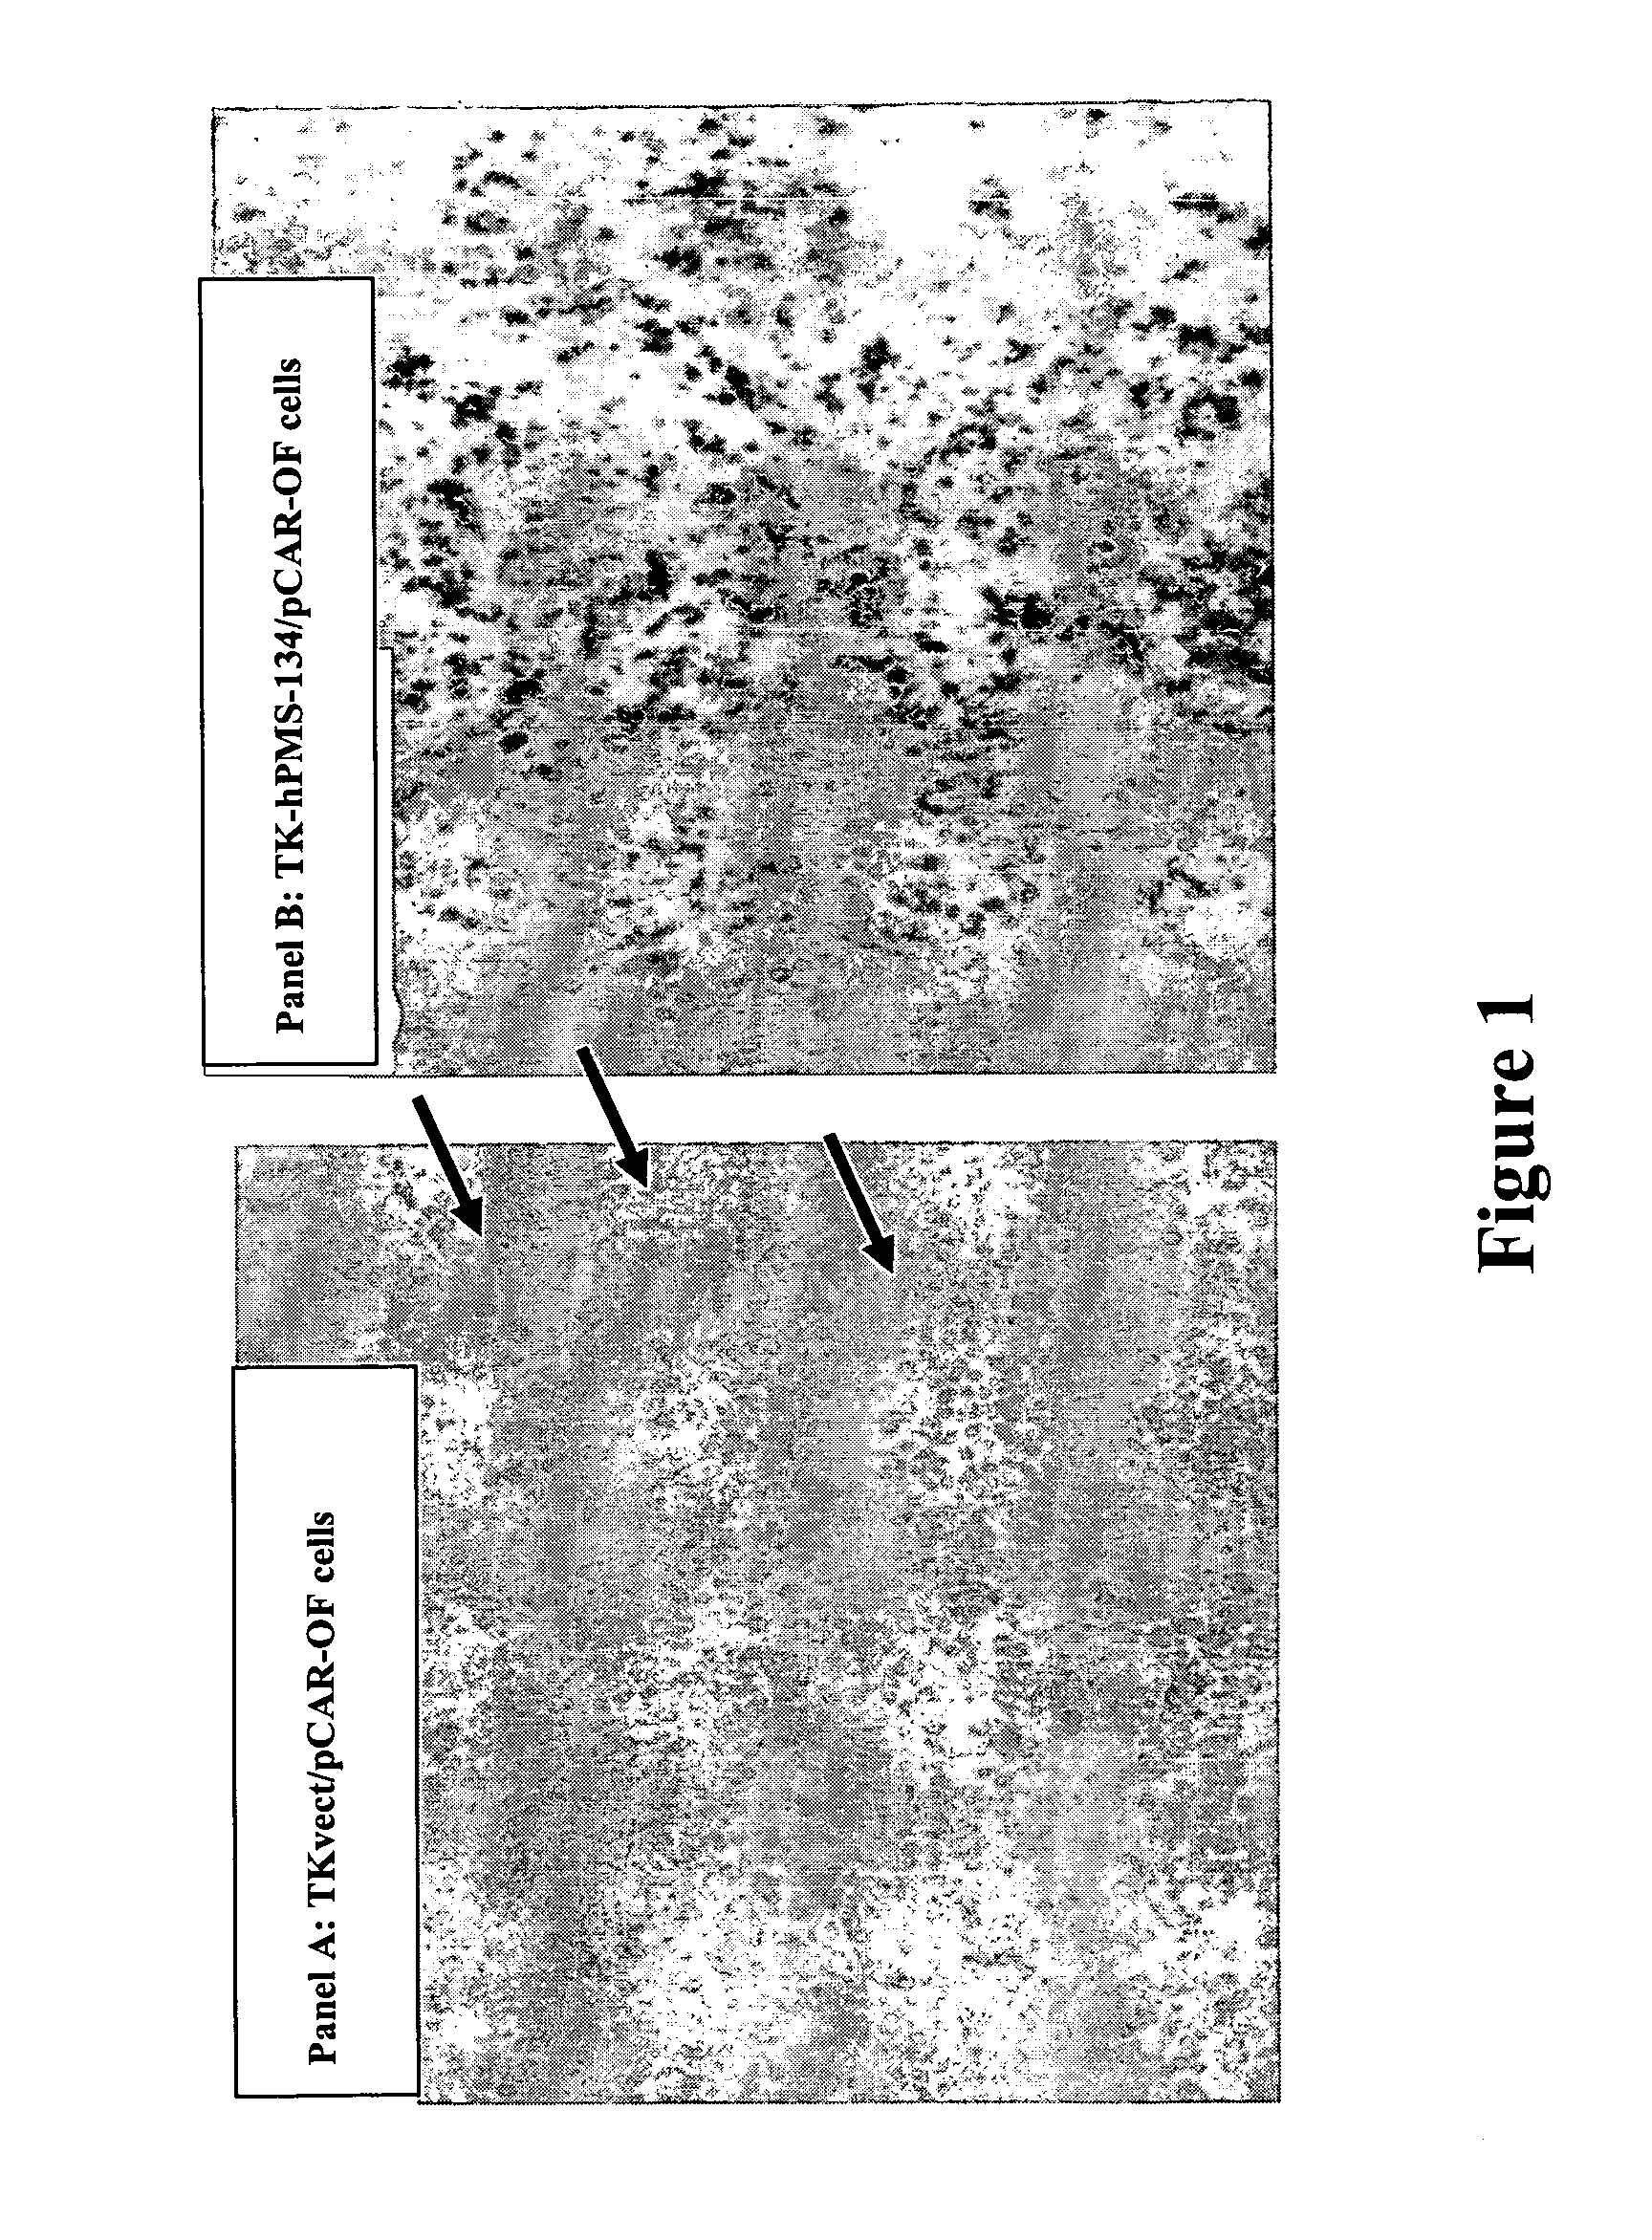 Methods for isolating novel antimicrobial agents from hypermutable mammalian cells